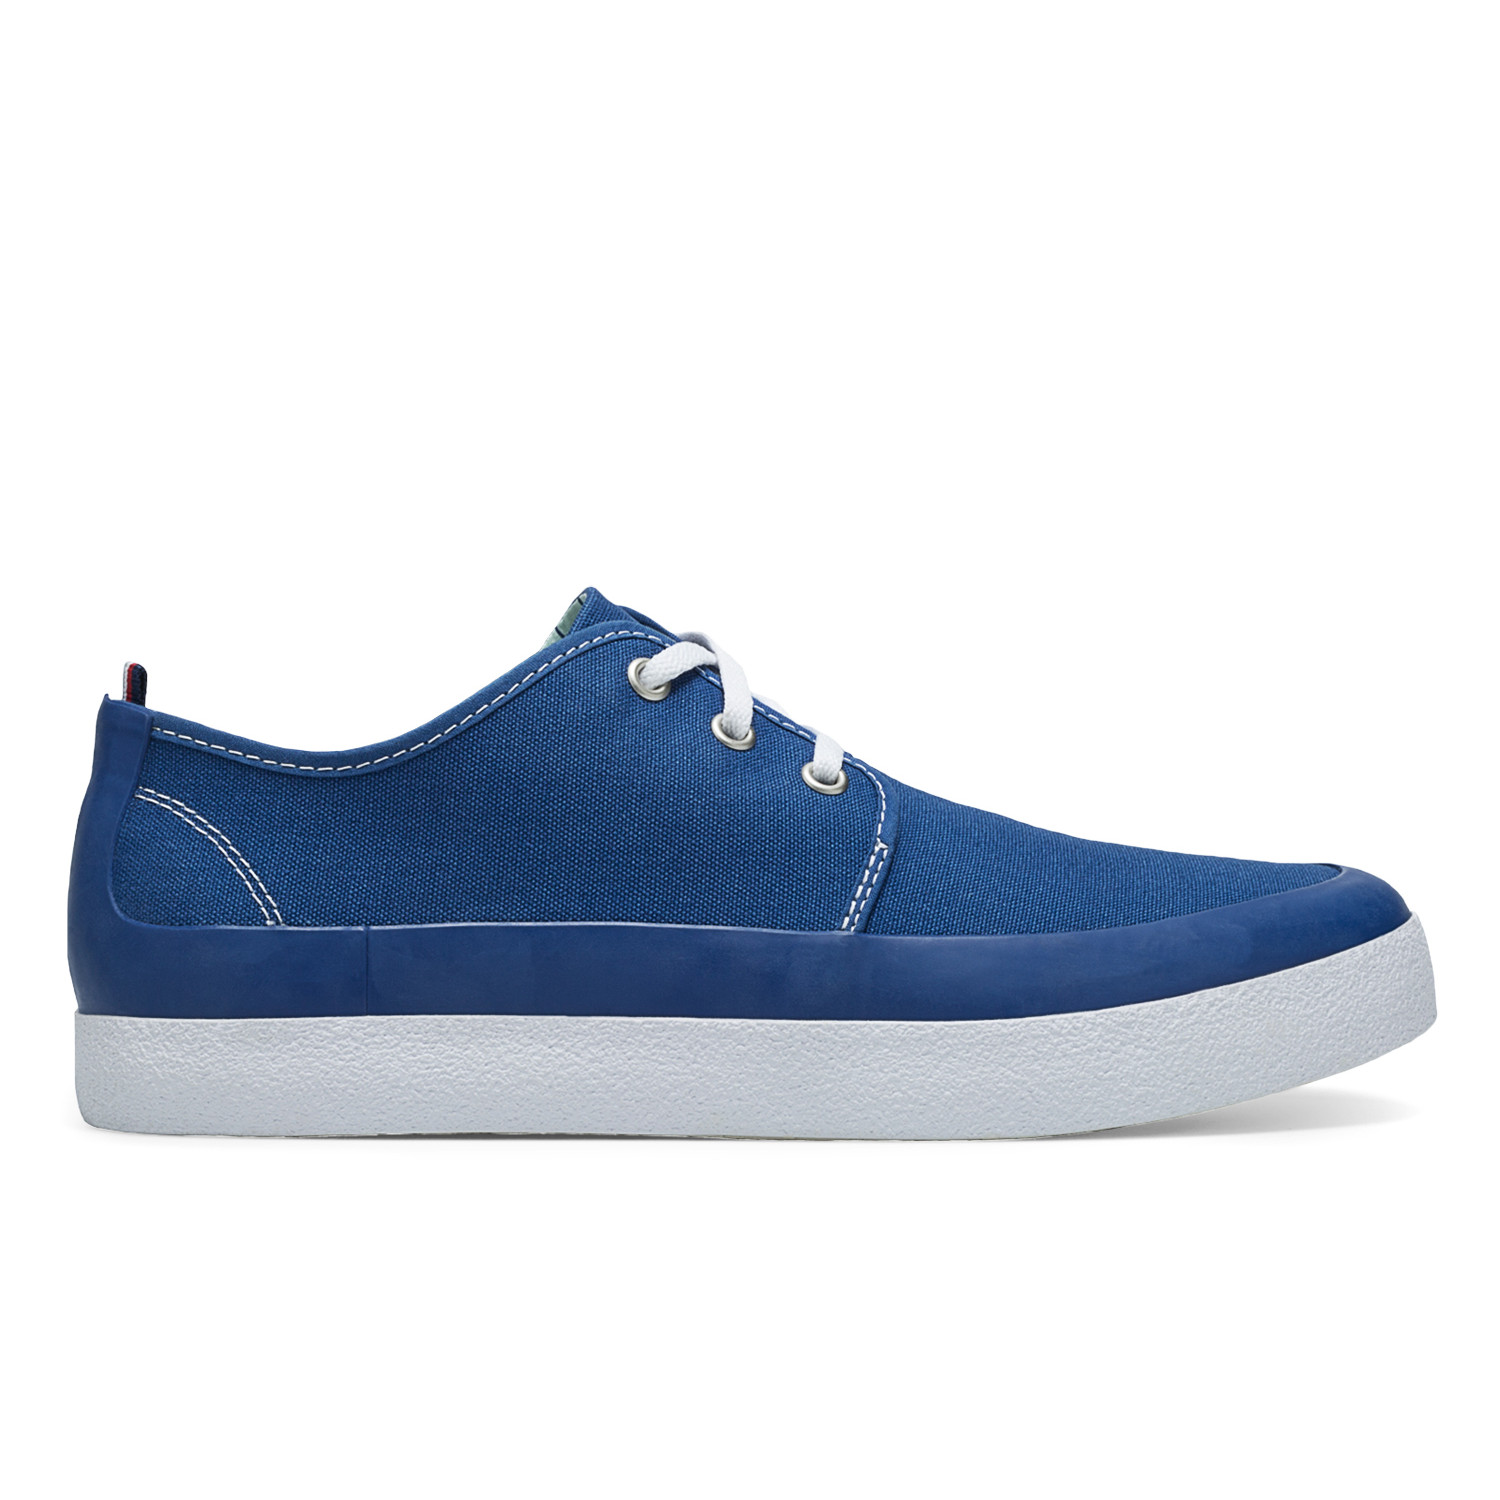 Perkins Lace-Up Sneaker // Blue (US: 8) - PF Flyers - Touch of Modern